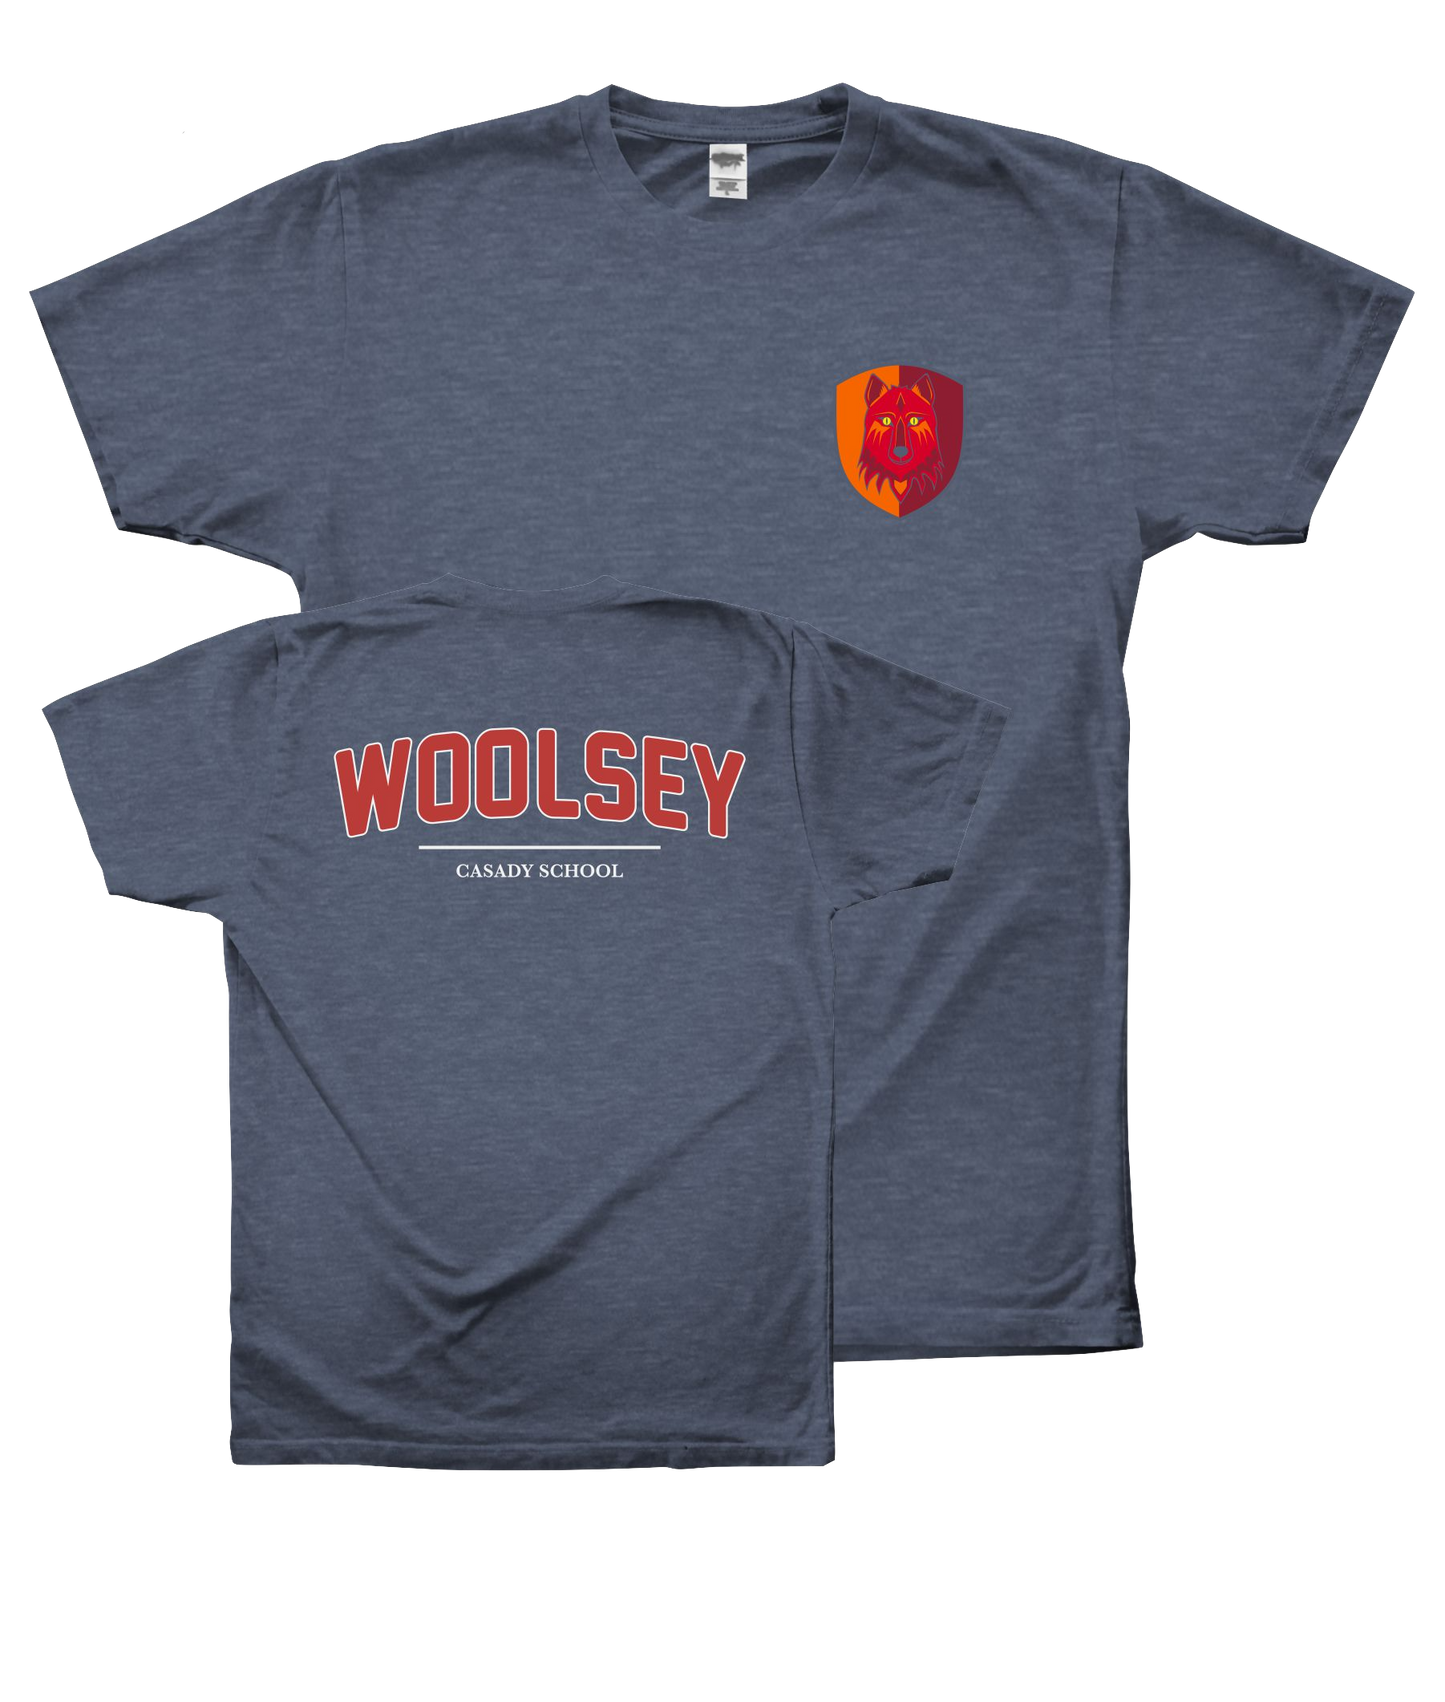 Youth Woolsey Shirt: C